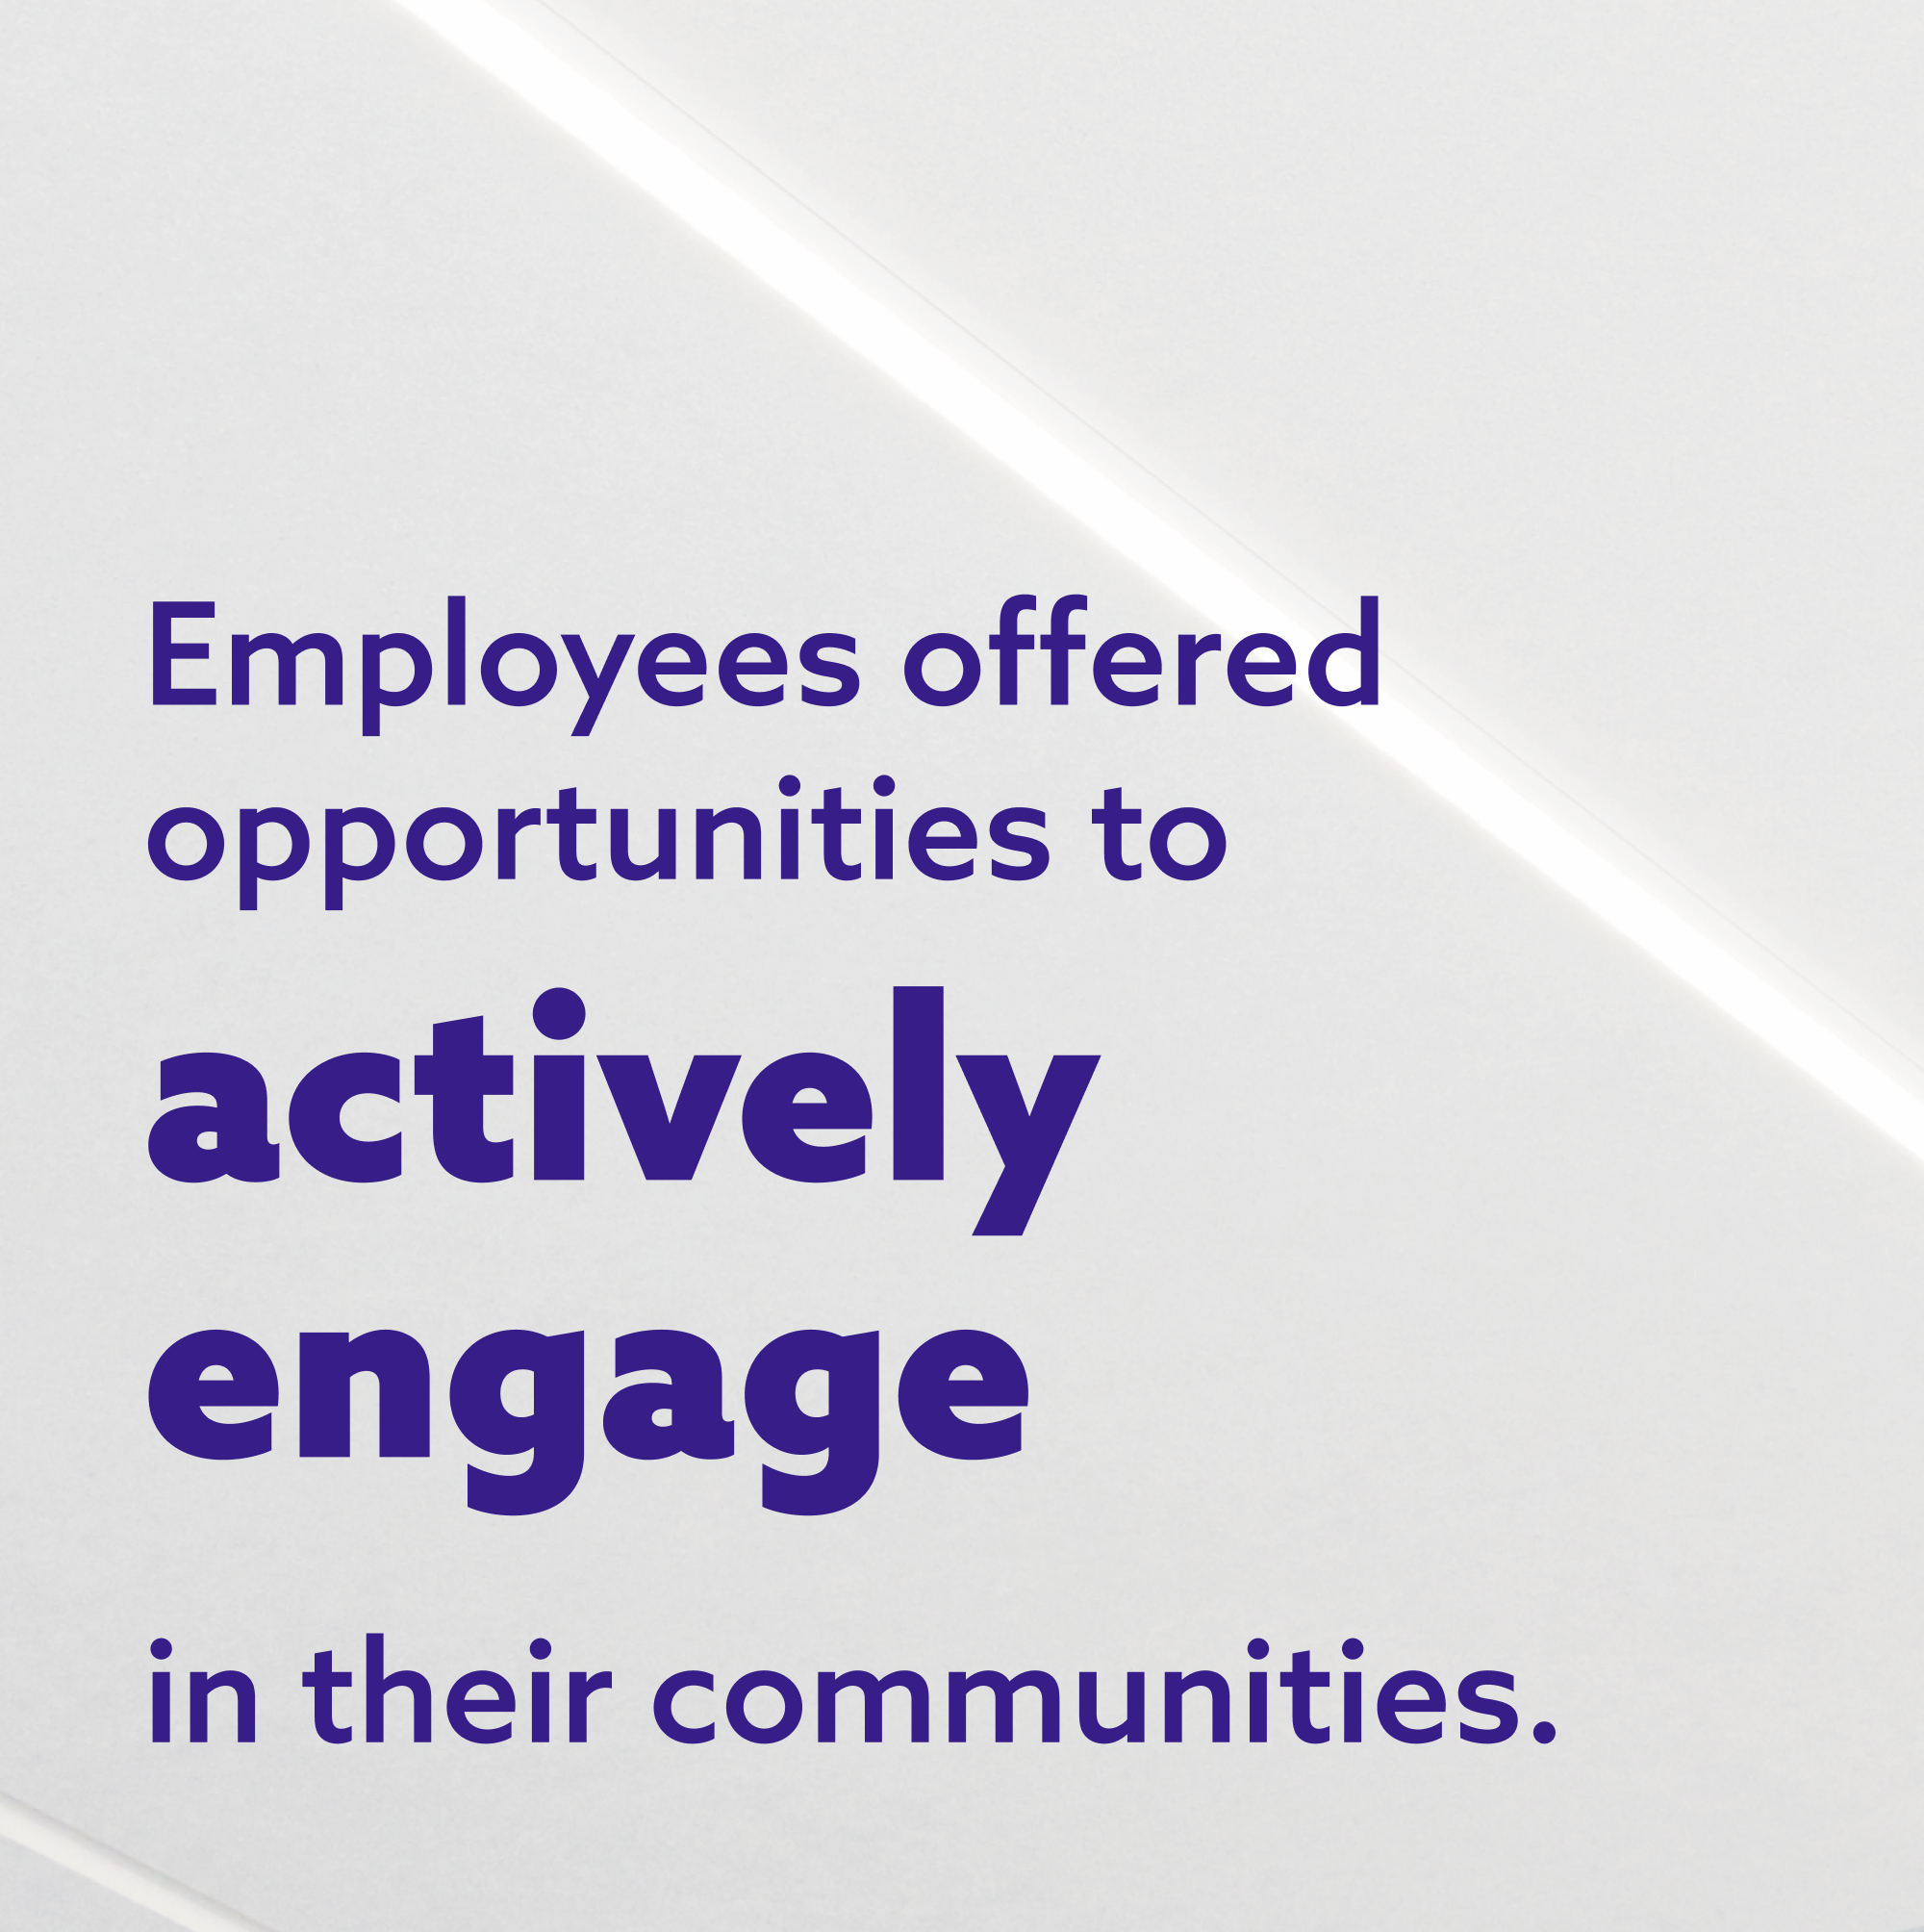 Employees offered opportunities to actively engage in their communities.